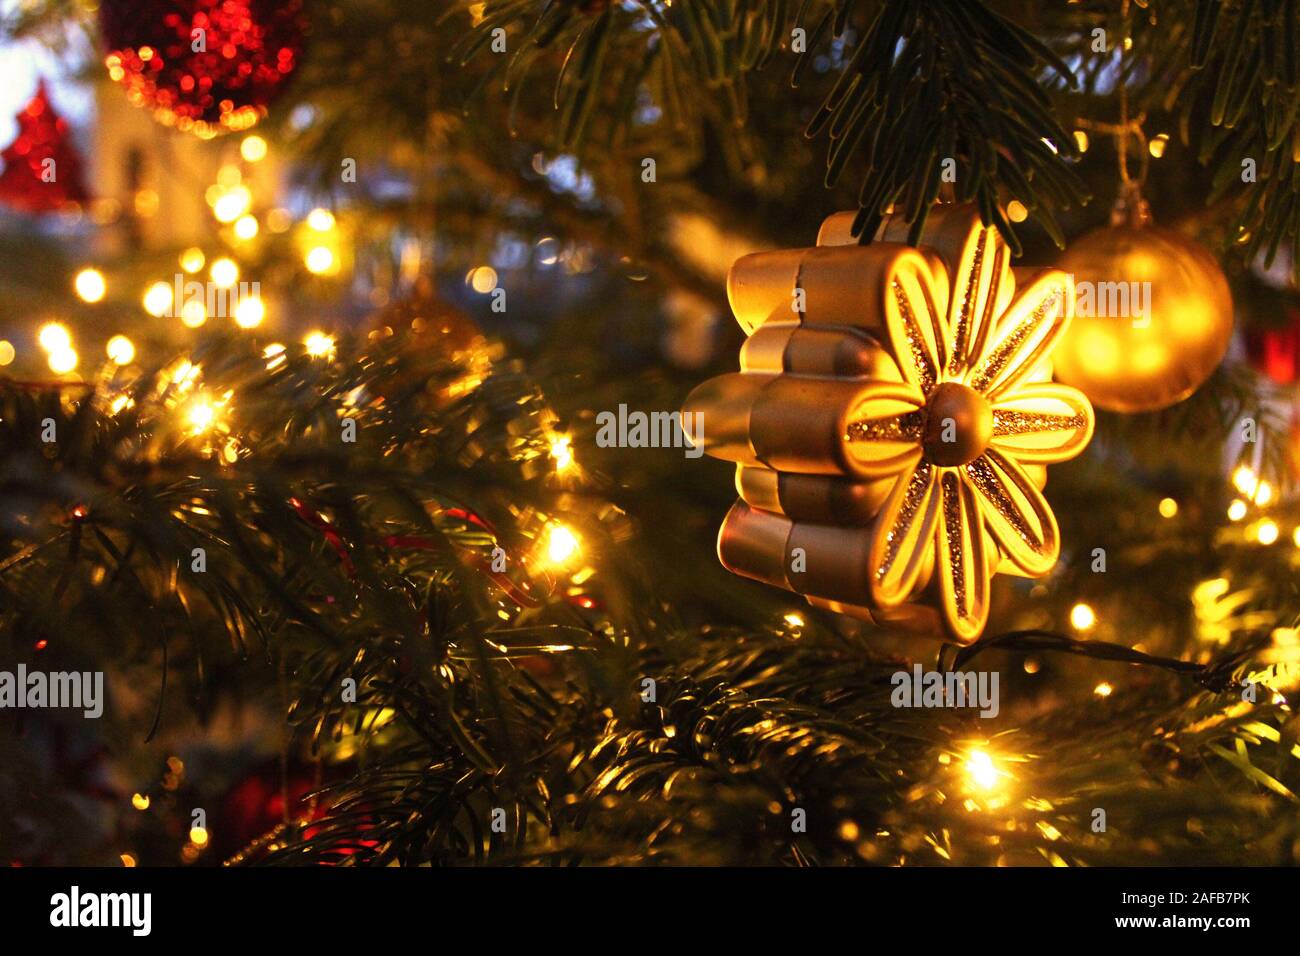 Gold flower Christmas ornament on a decorated Christmas tree Stock Photo